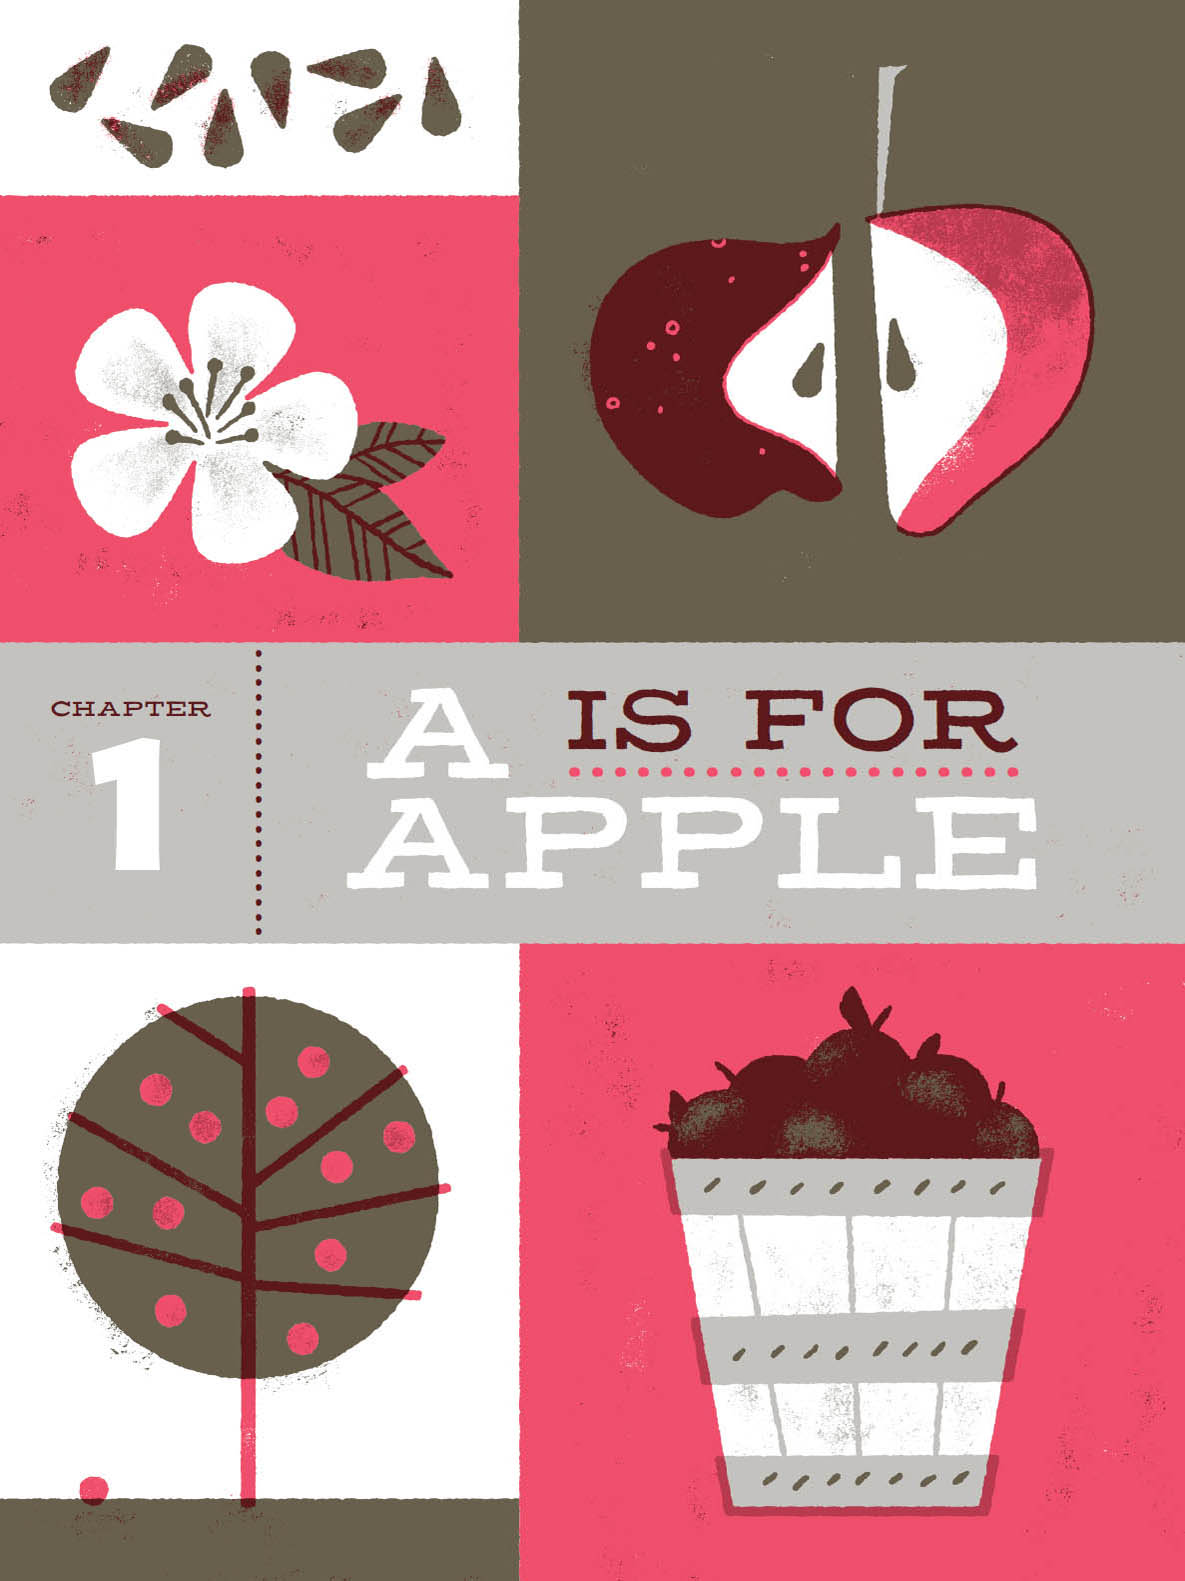 CHAPTER 1 A IS FOR APPLE